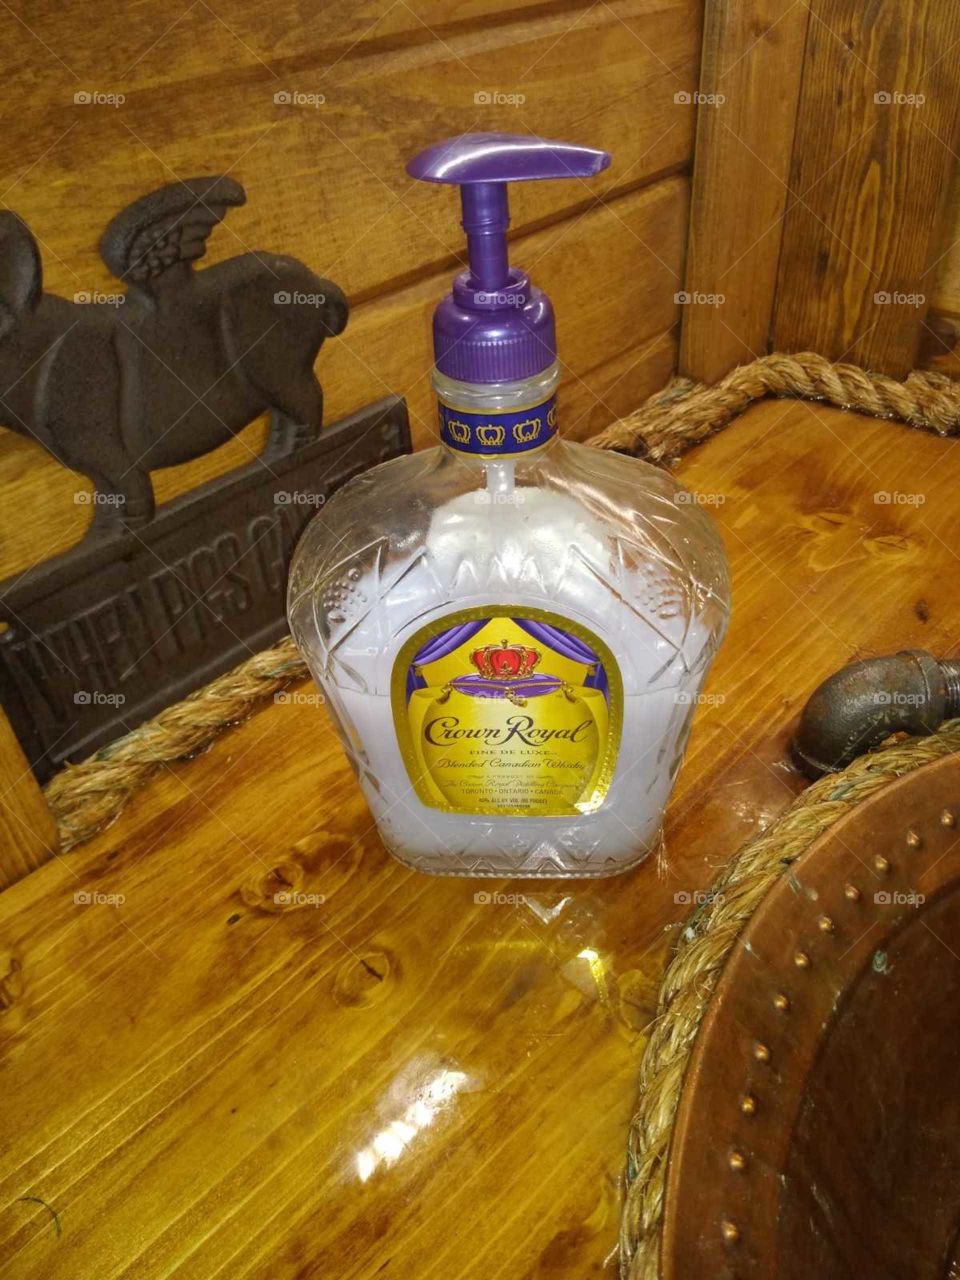 The amazing Pig and Pepper bbq restaurant in Fort Smith, Arkansas has grrrreat creative owners& employee's: transformed a Crown Royal bottle into a soap/hand sanitizer dispenser fabulous!!!